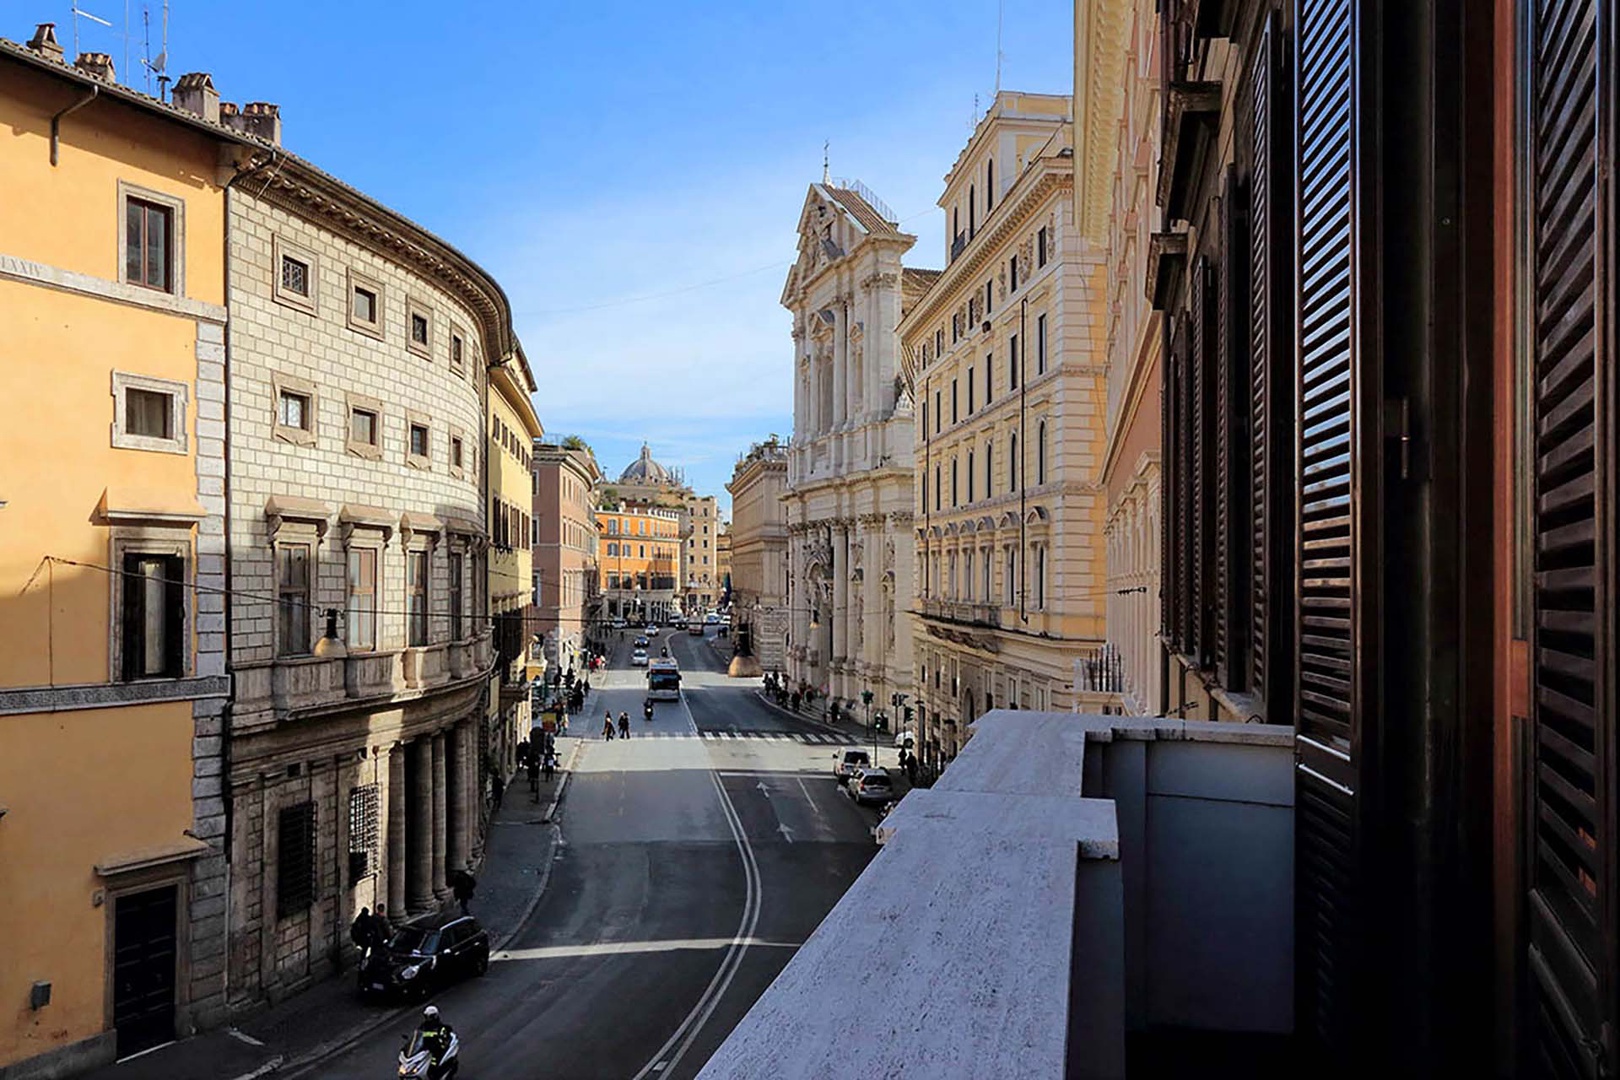 Enjoy the sites and sounds of the Piazza from the step-out balcony.